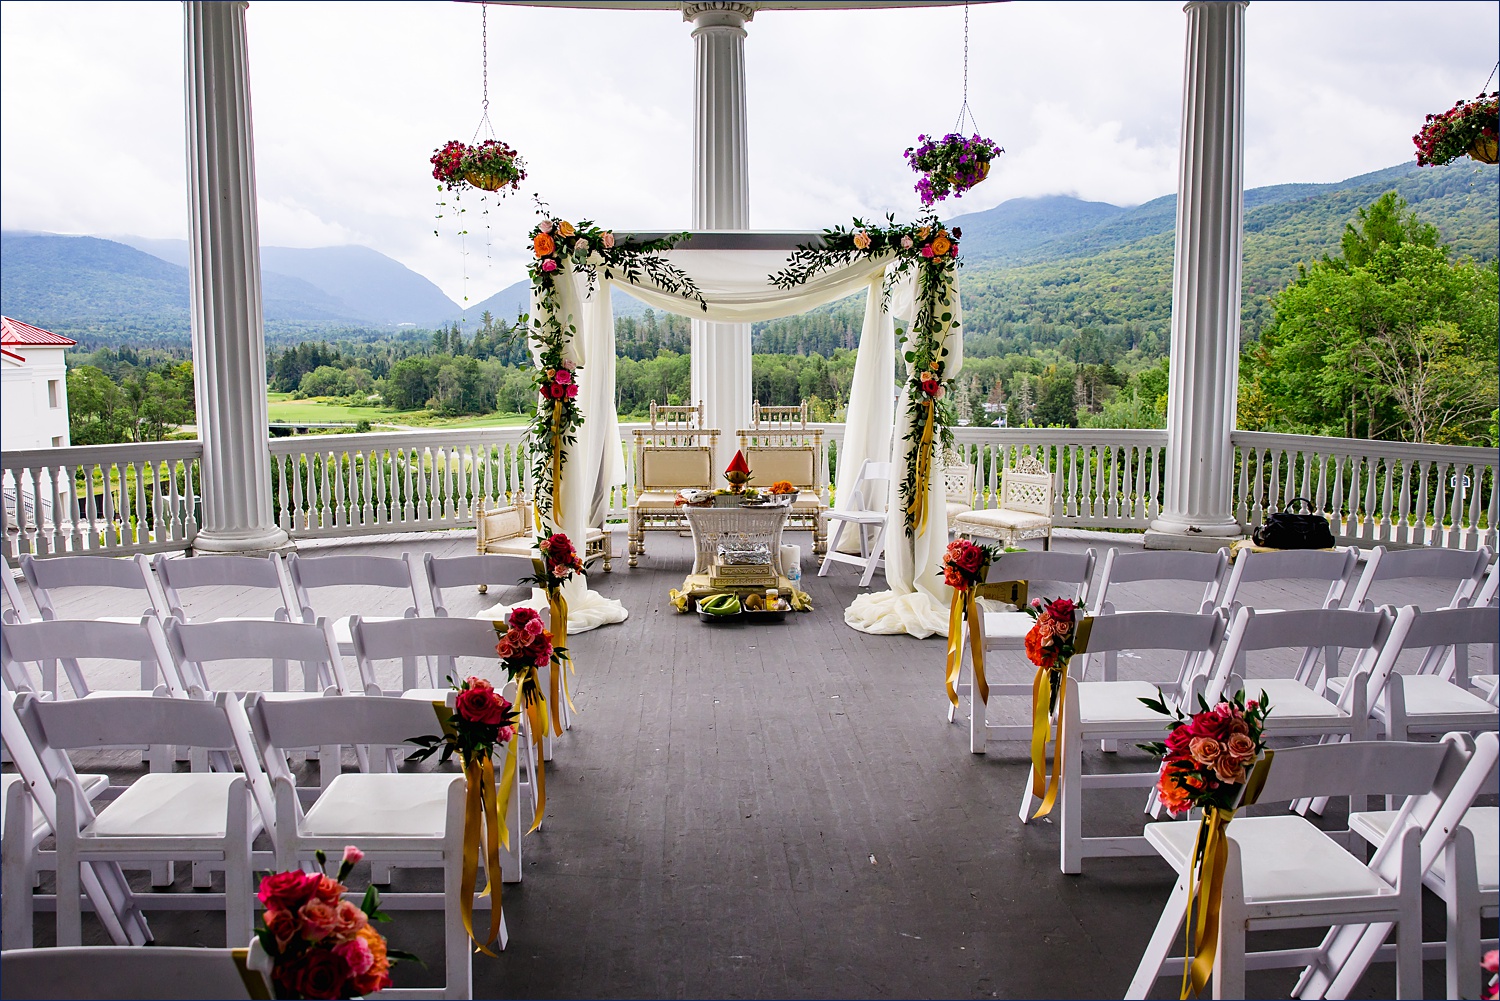 The Hindu ceremony altar set against the White Mountains on the veranda